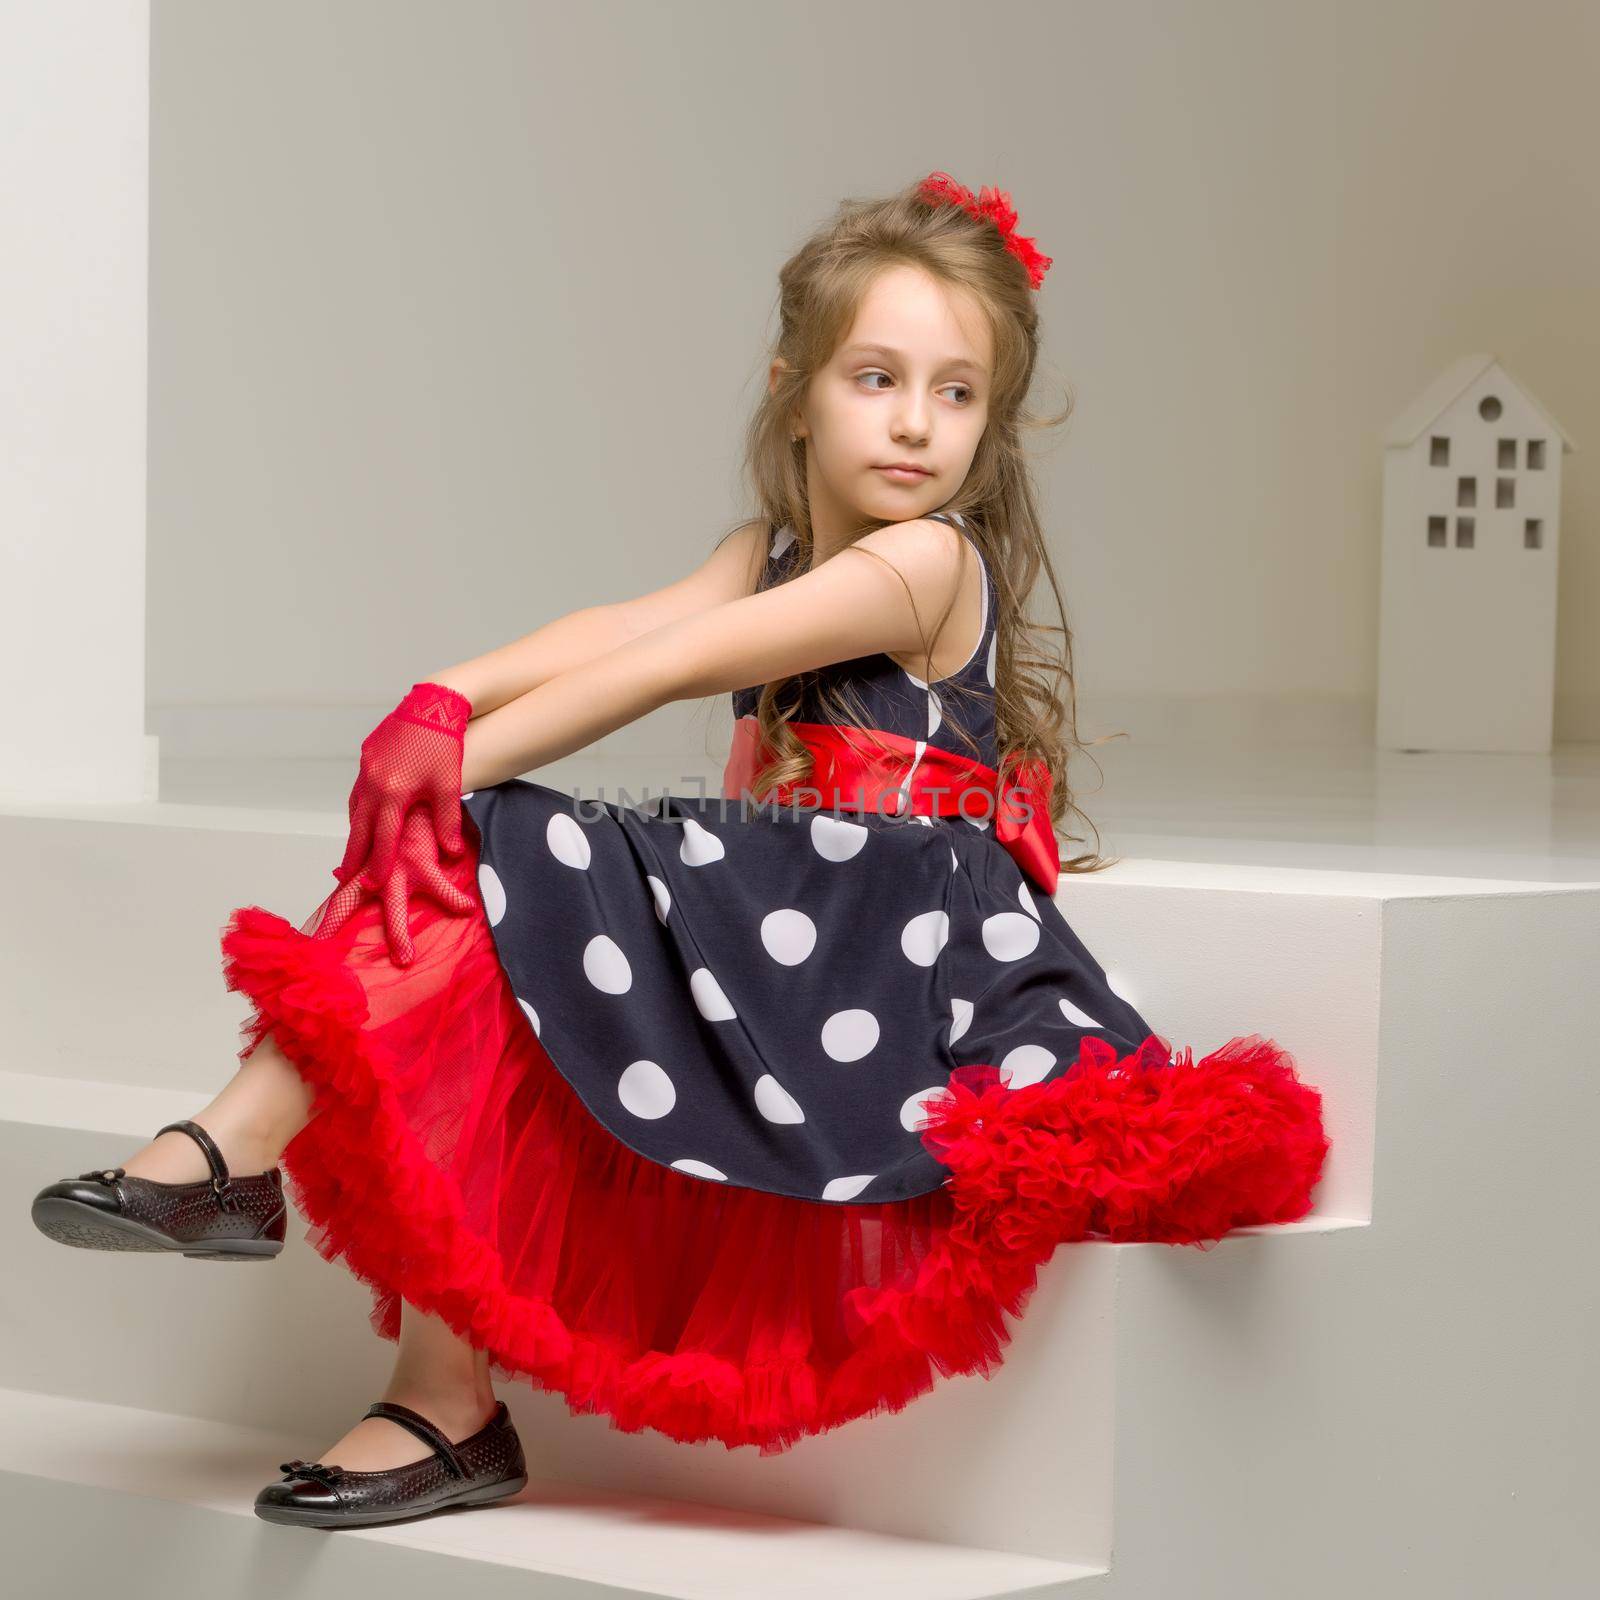 Portrait of Pretty Girl Wearing Blue Polka Dot Dress, Red Gloves and Bow Sitting on White Stairs with Crossed Legs and Looking to the Side, Charming Stylish Girl in Retro Clothes Posing in Studio